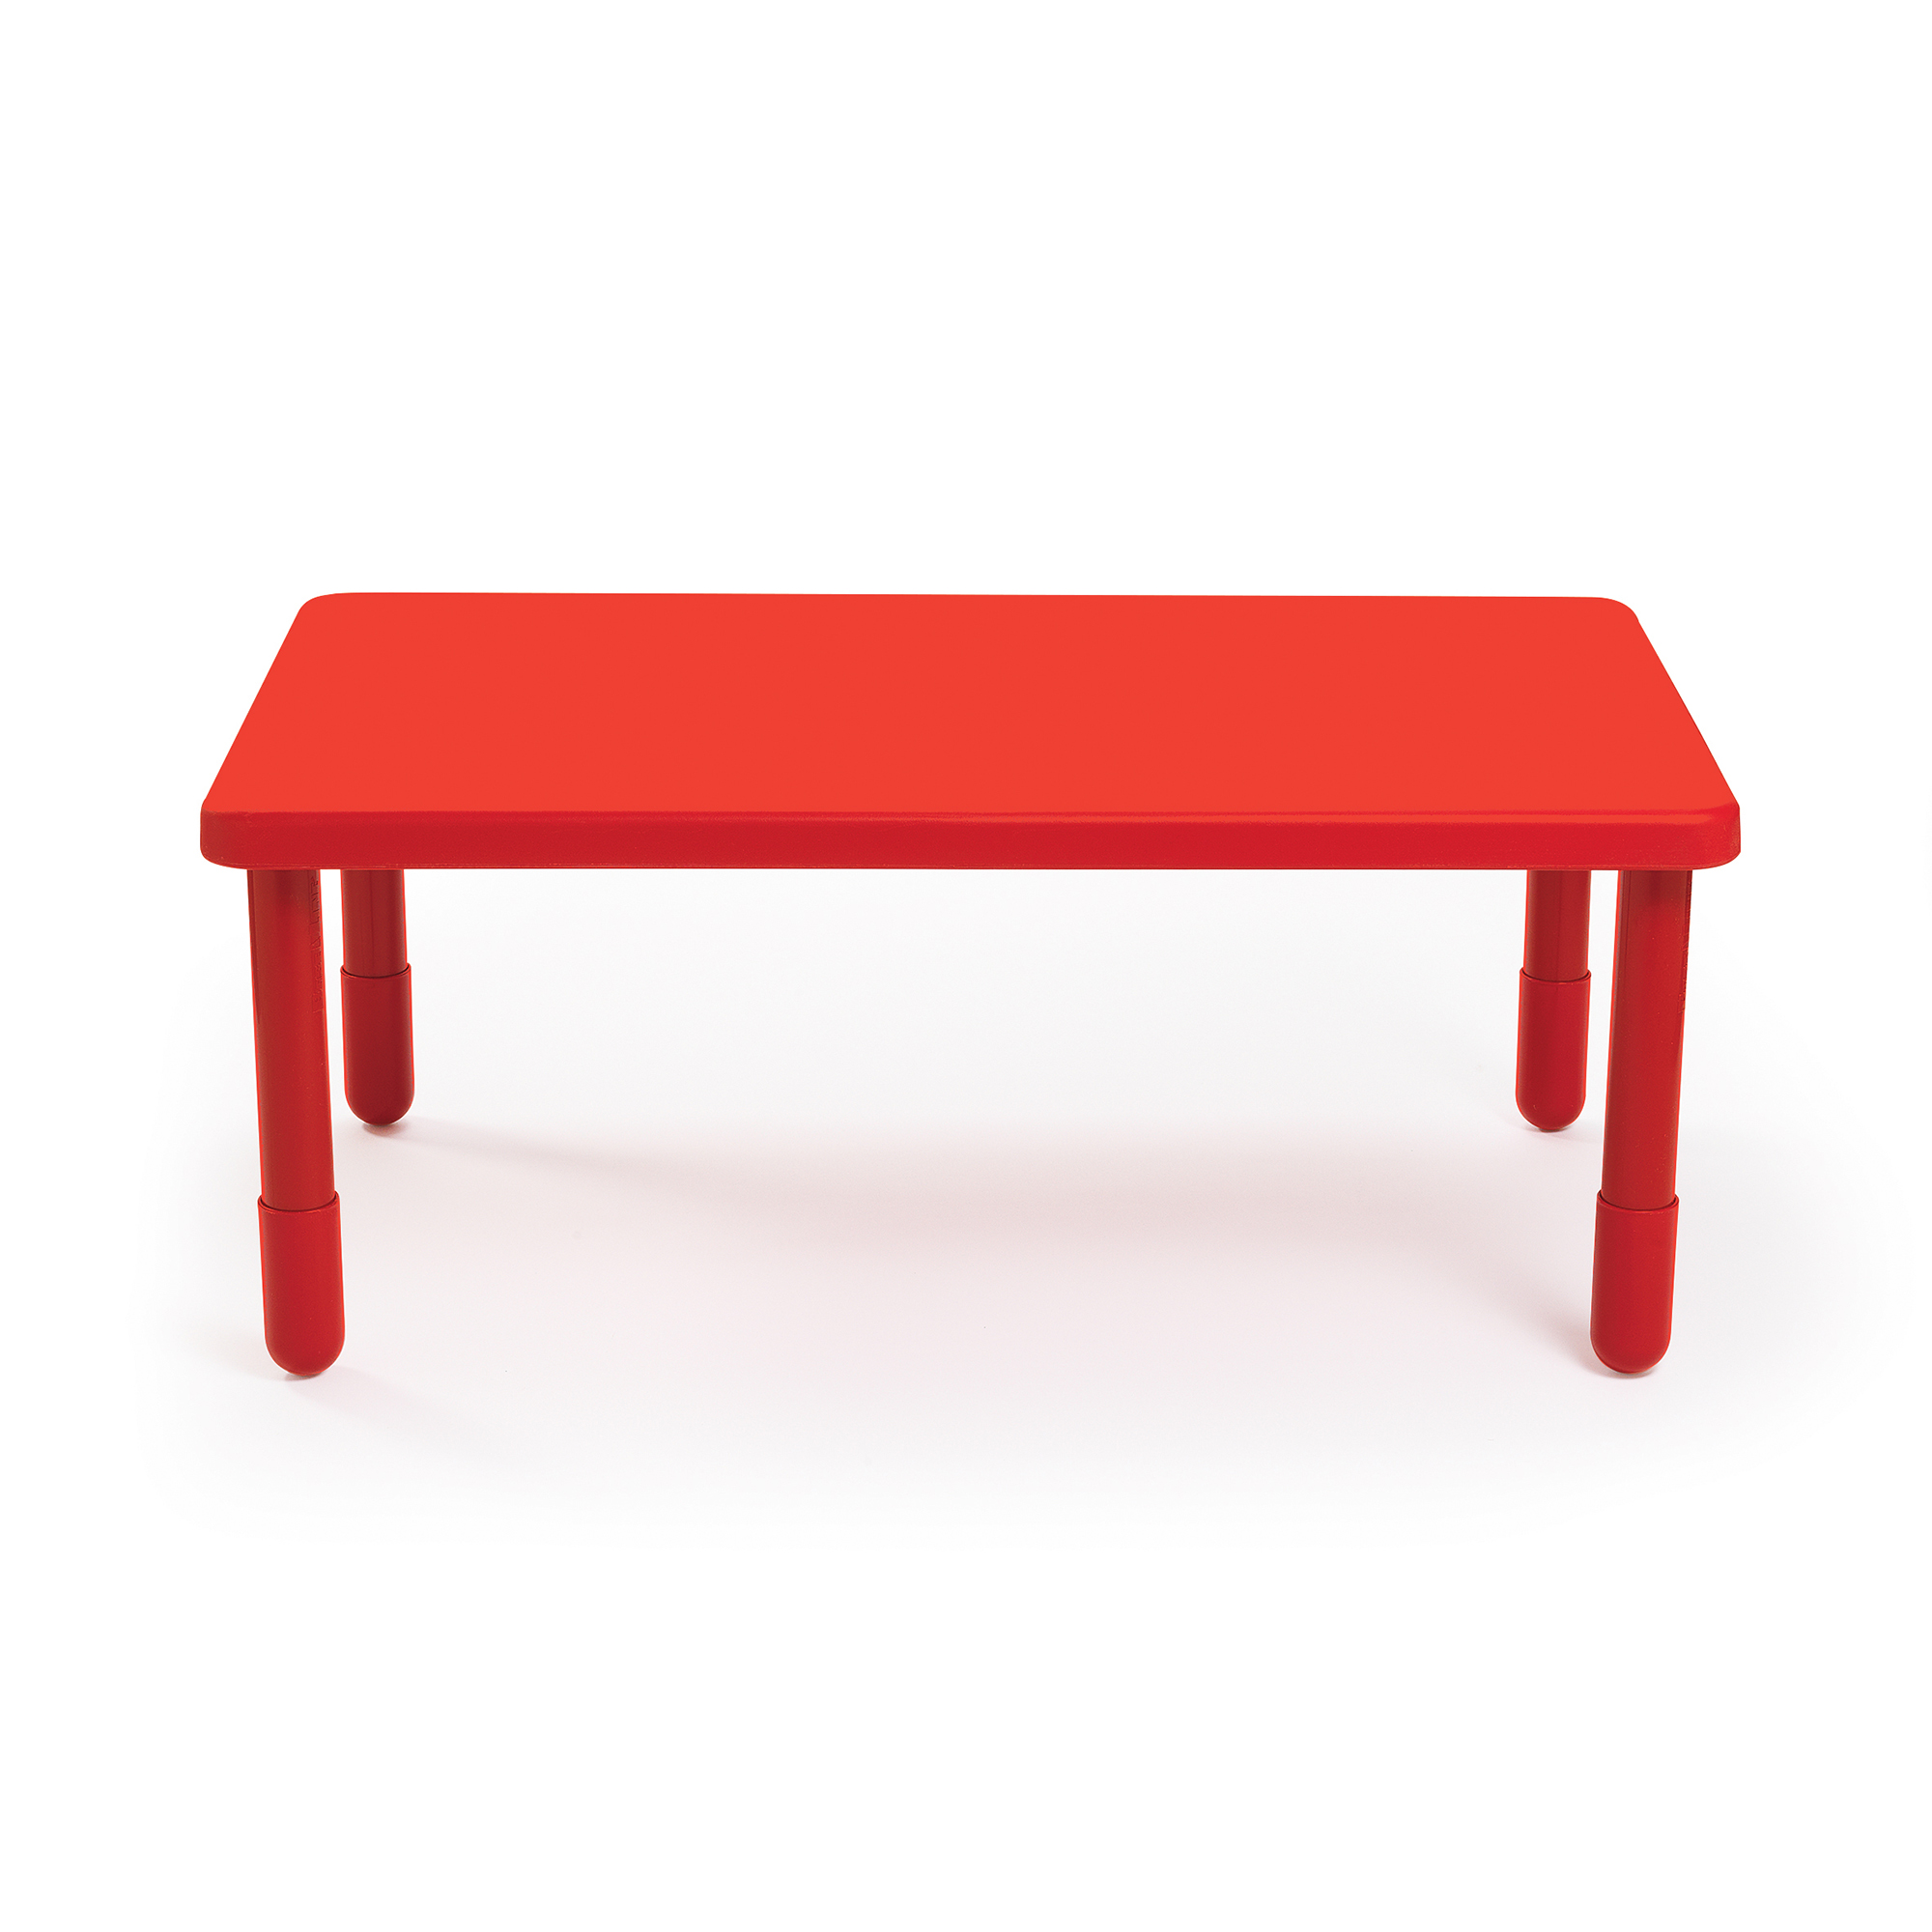 Value Rectangle Table - Candy Apple Red with 51 cm  Legs